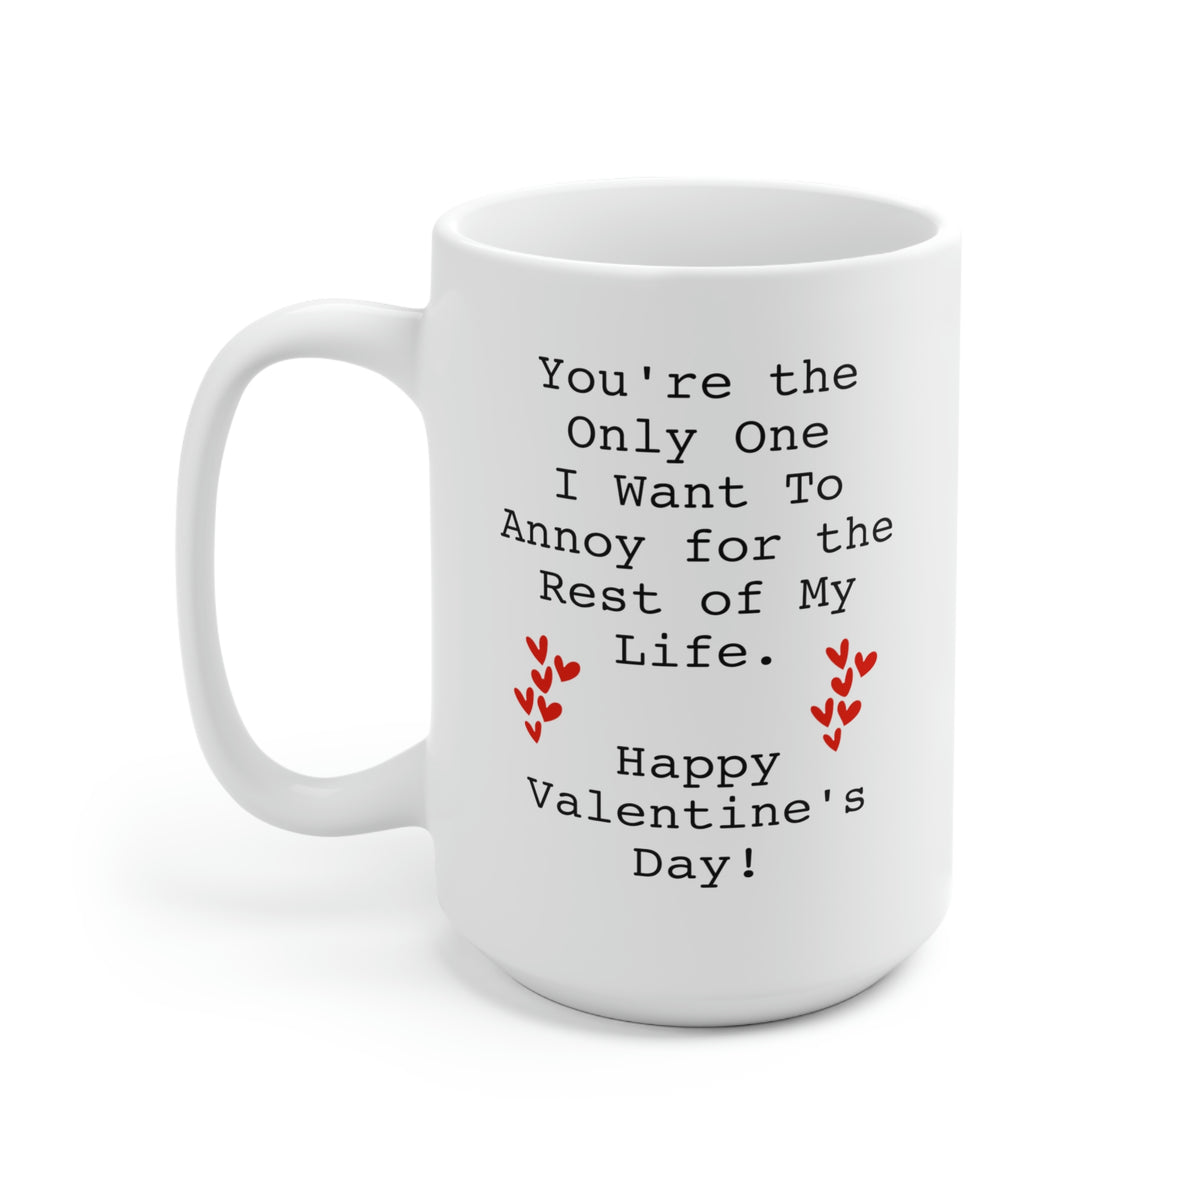 Valentins Day, You're the Only One I want To Annoy for the Rest of My Life, Funny 15oz Coffee Mug For Him Her, Love Cup For Wife Husband